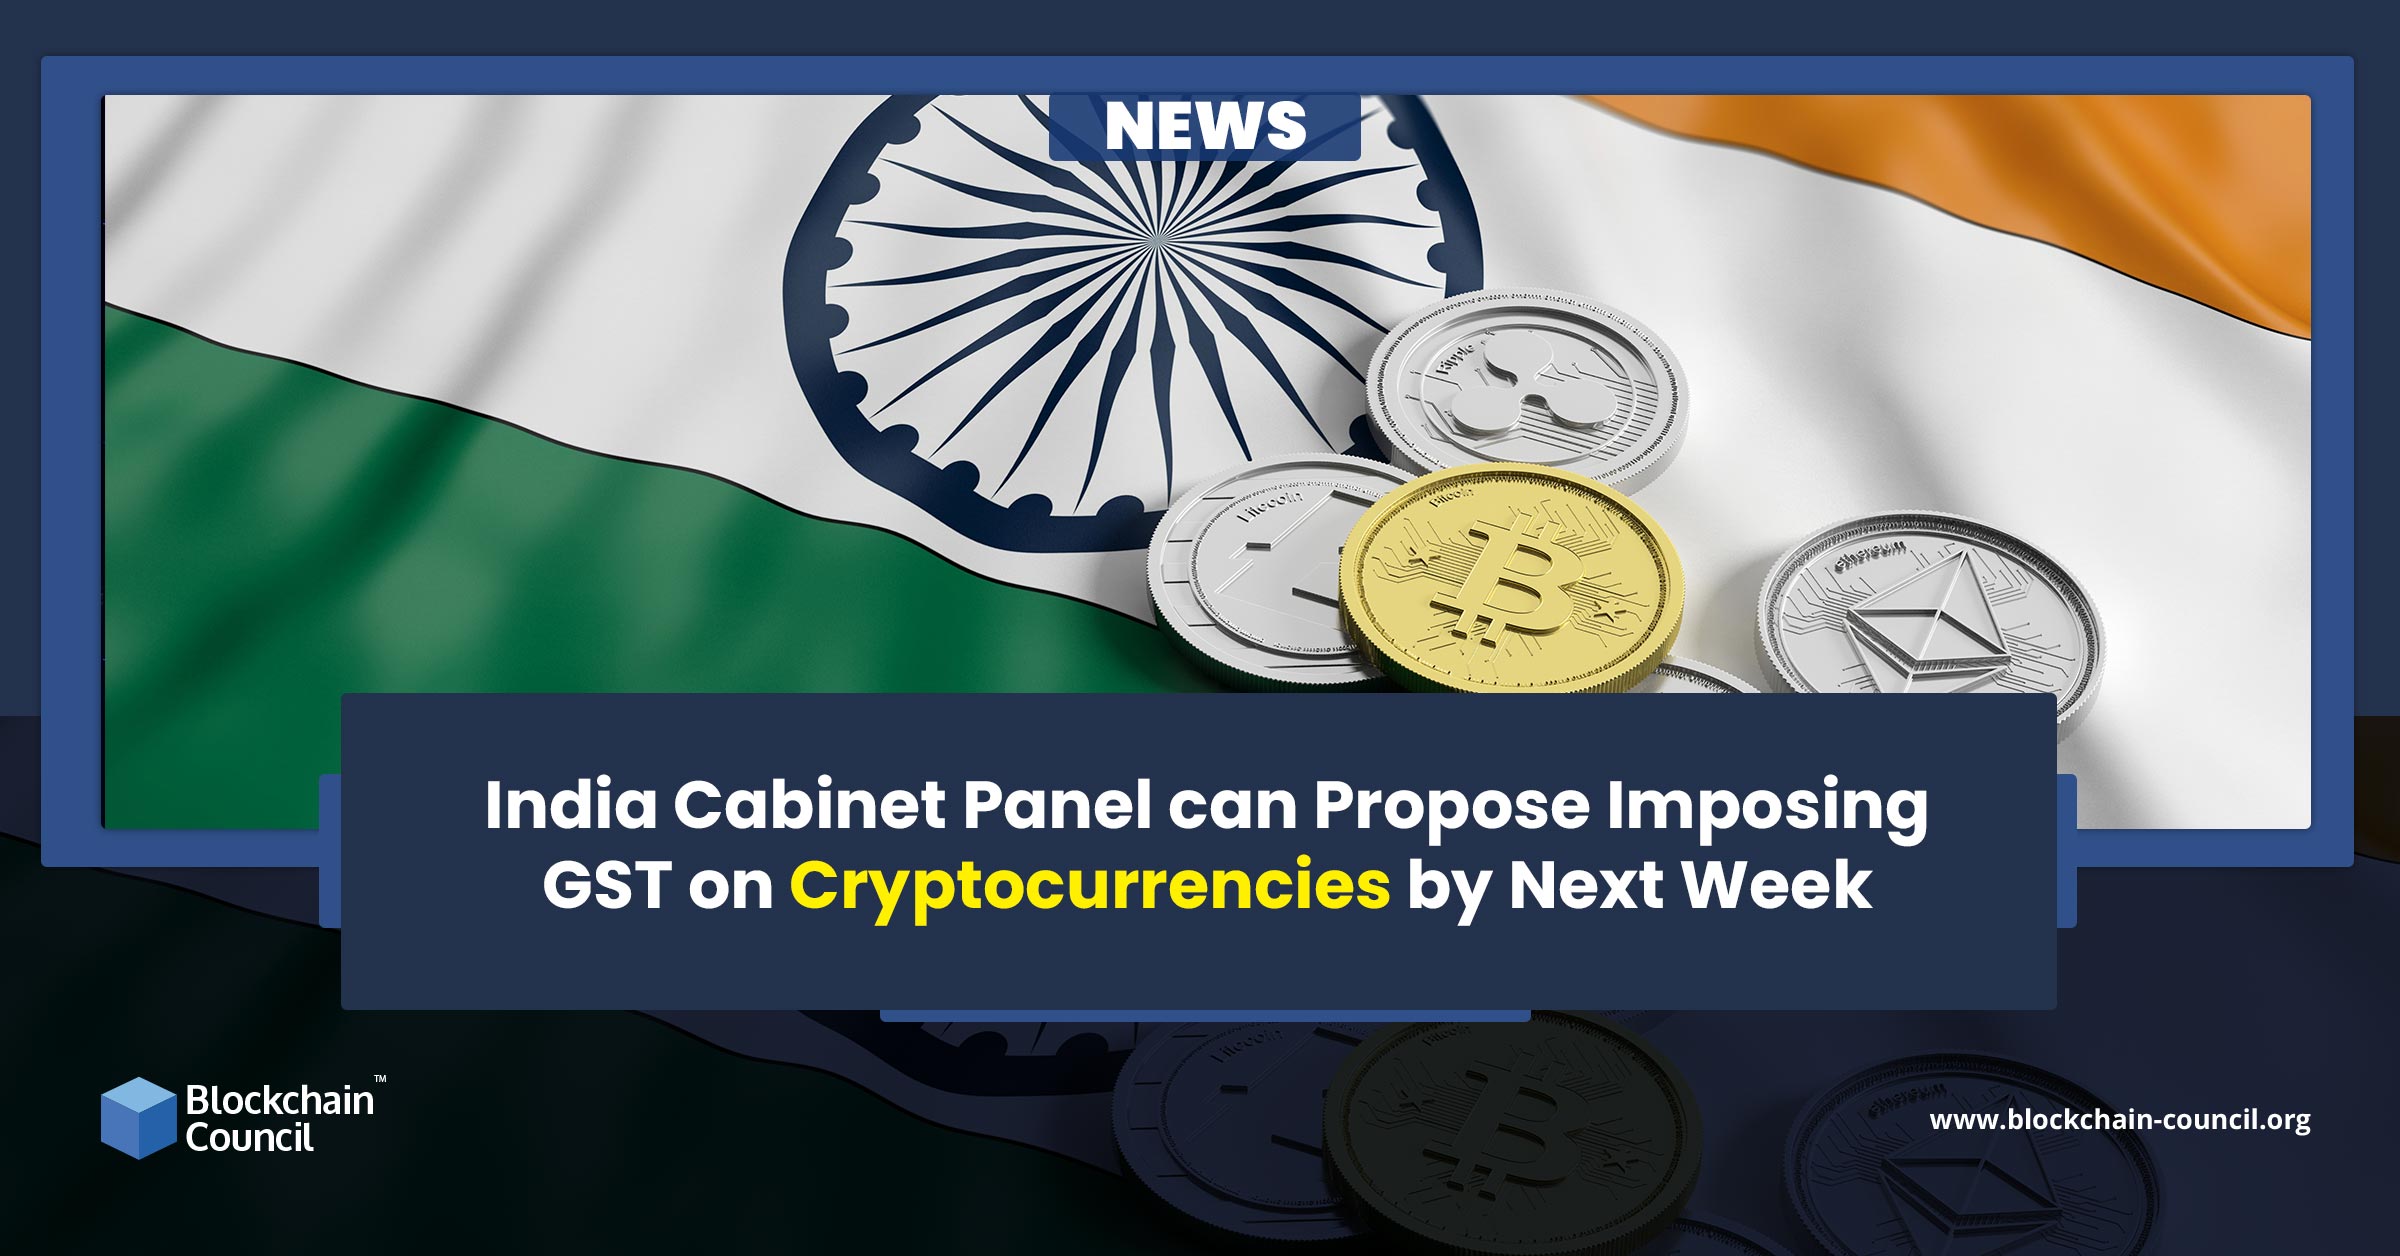 India Cabinet Panel can Propose Imposing GST on Cryptocurrencies by Next Week